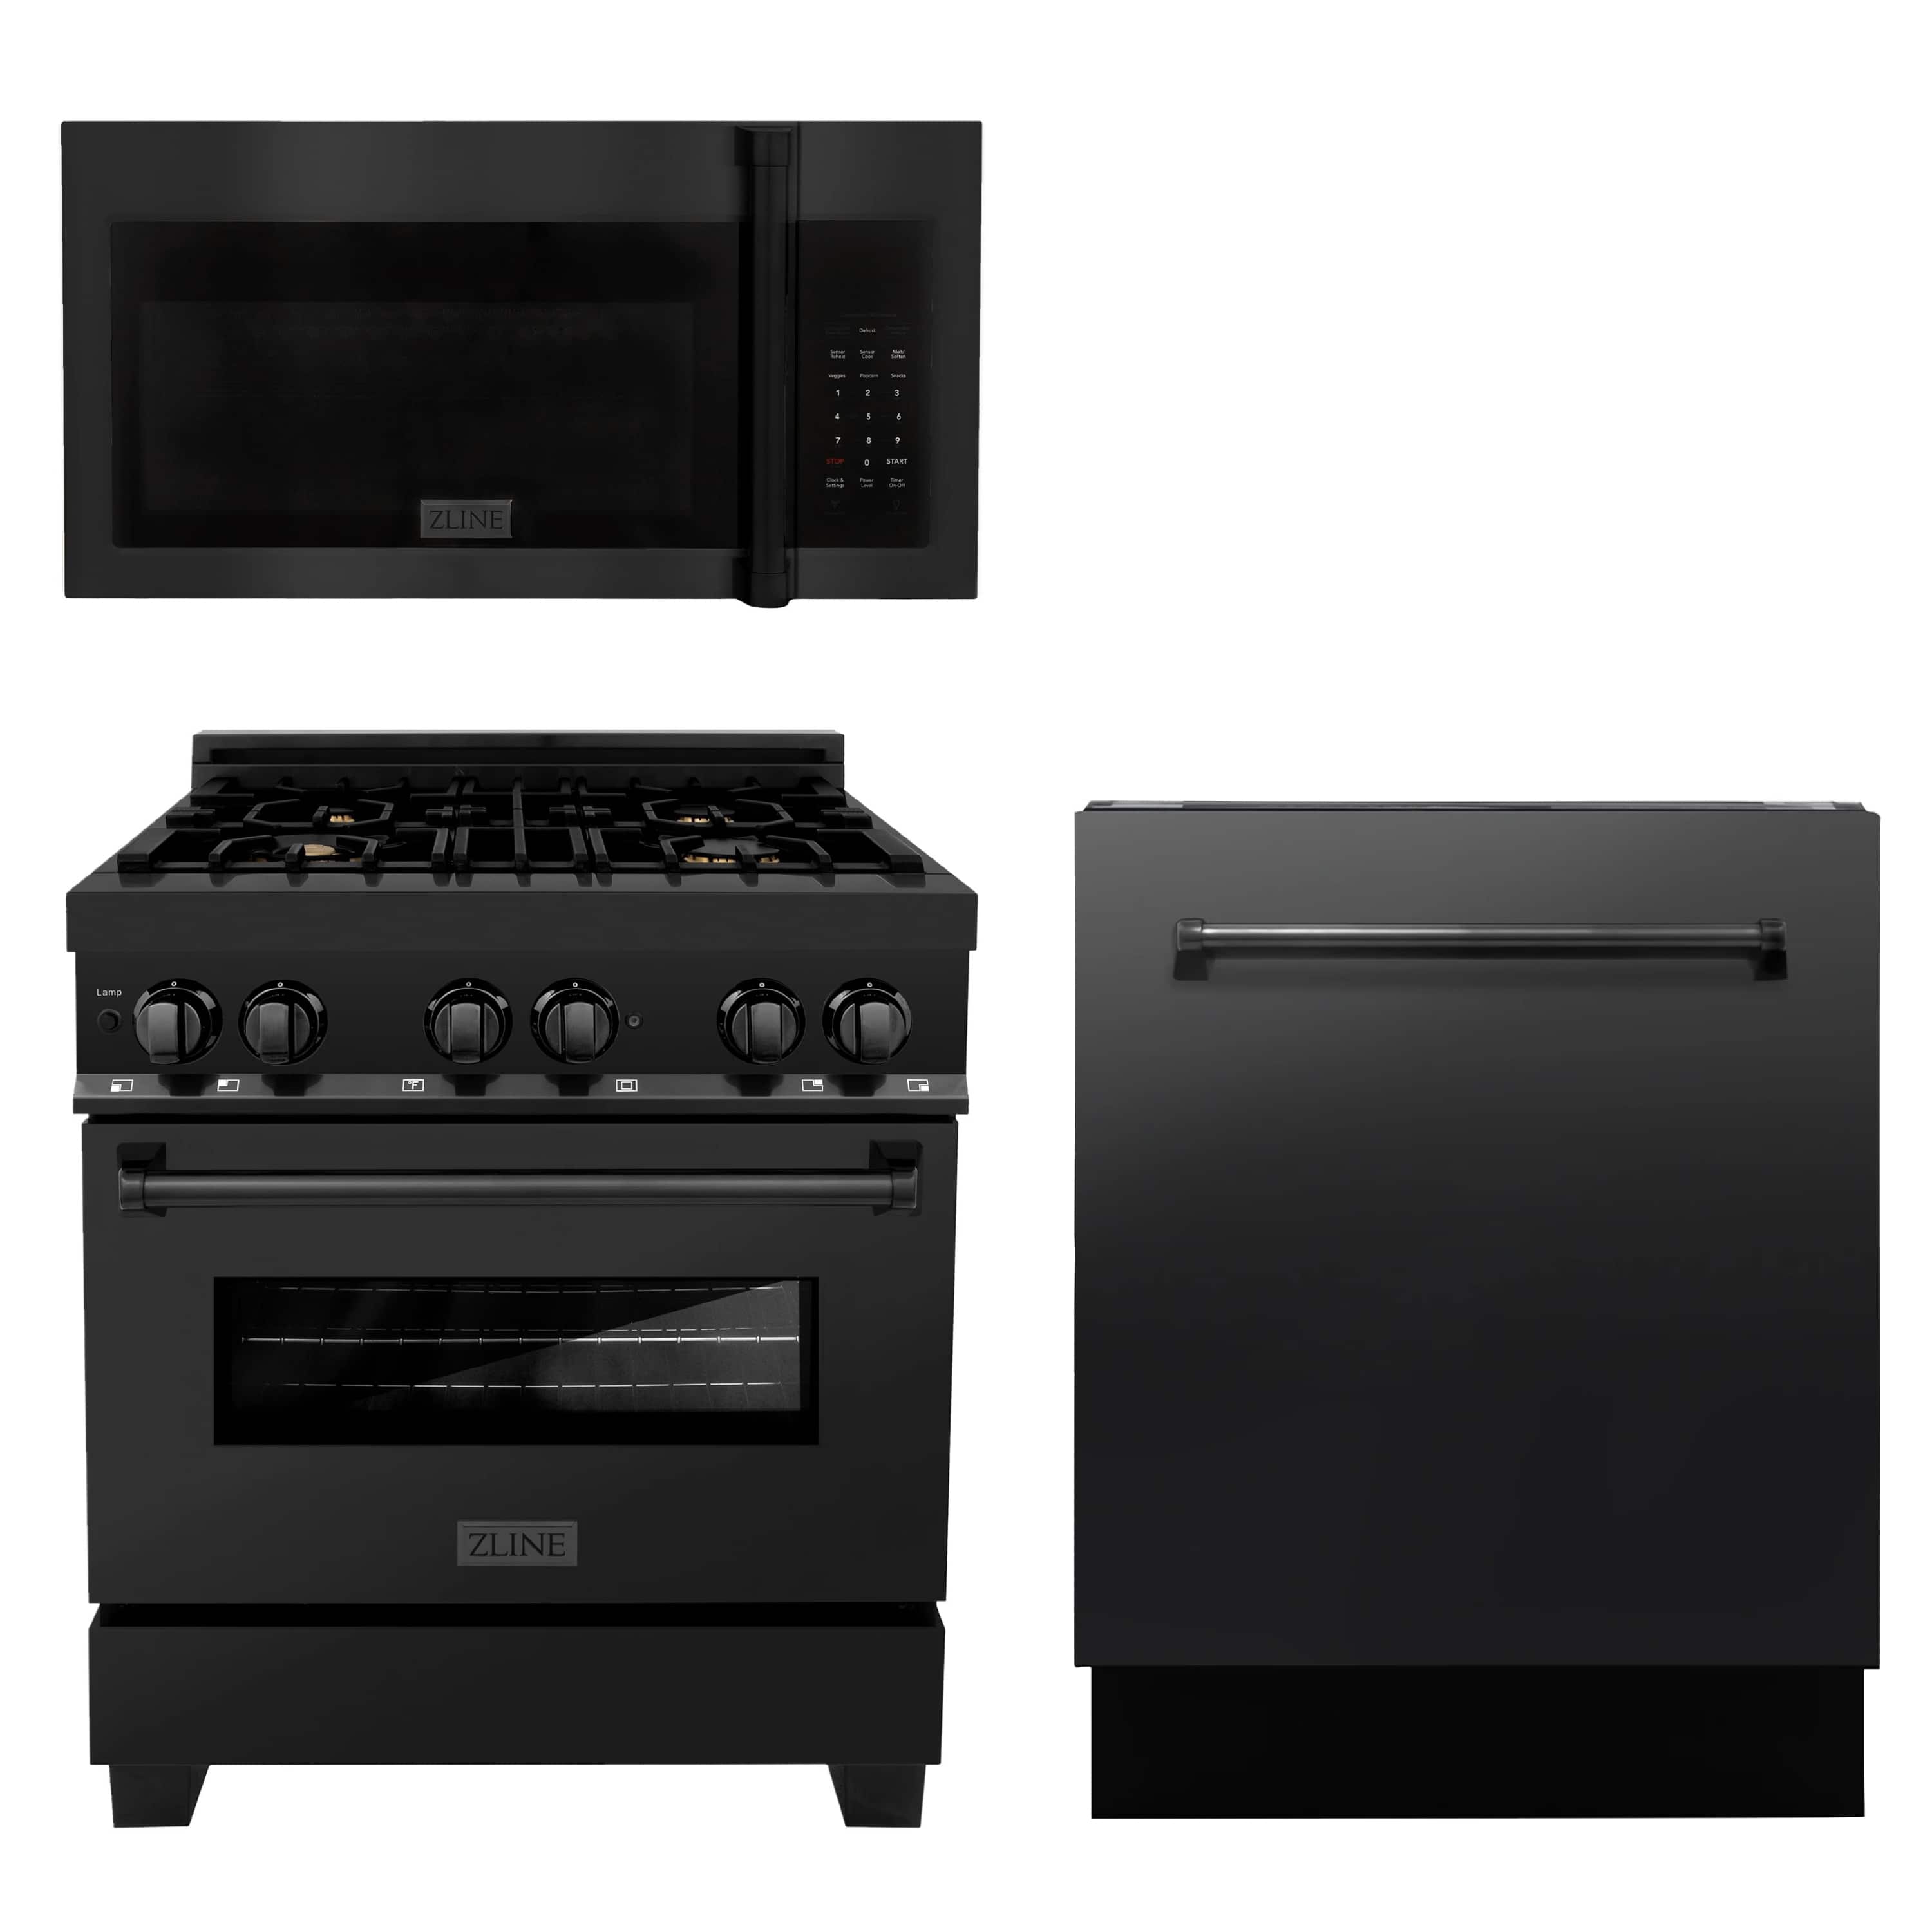 ZLINE 3-Piece Appliance Package - 30-Inch Dual Fuel Range with Brass Burners, Over the RangeMicrowave/Vent Hood Combo, and 3-Rack Dishwasher in Black Stainless Steel (3KP-RABOTRH30-DWV)